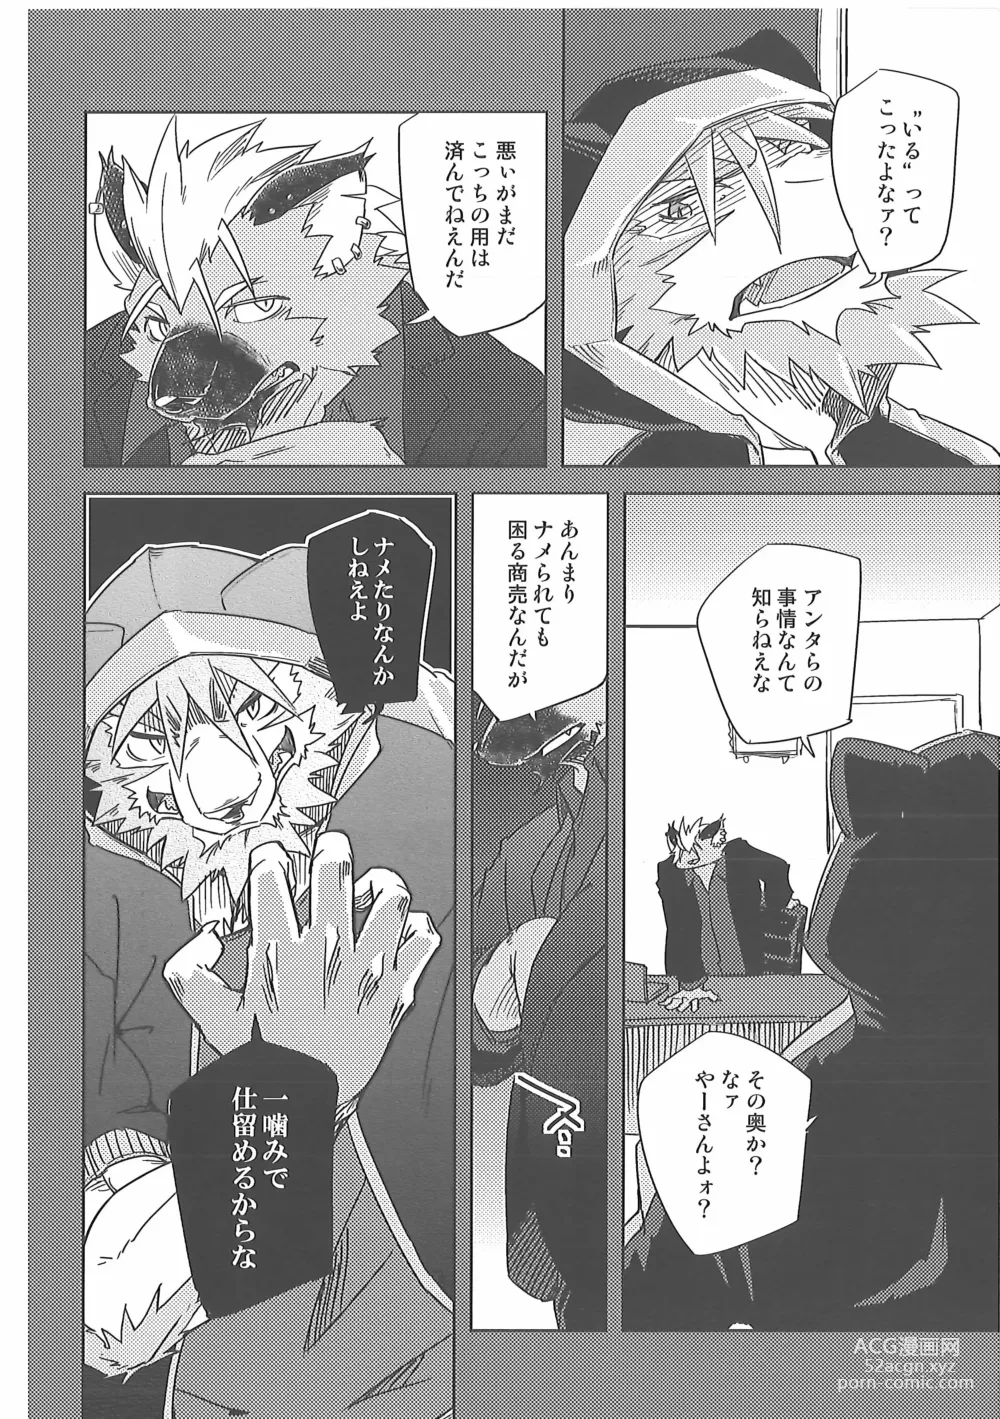 Page 8 of doujinshi Water under The Bridge 2